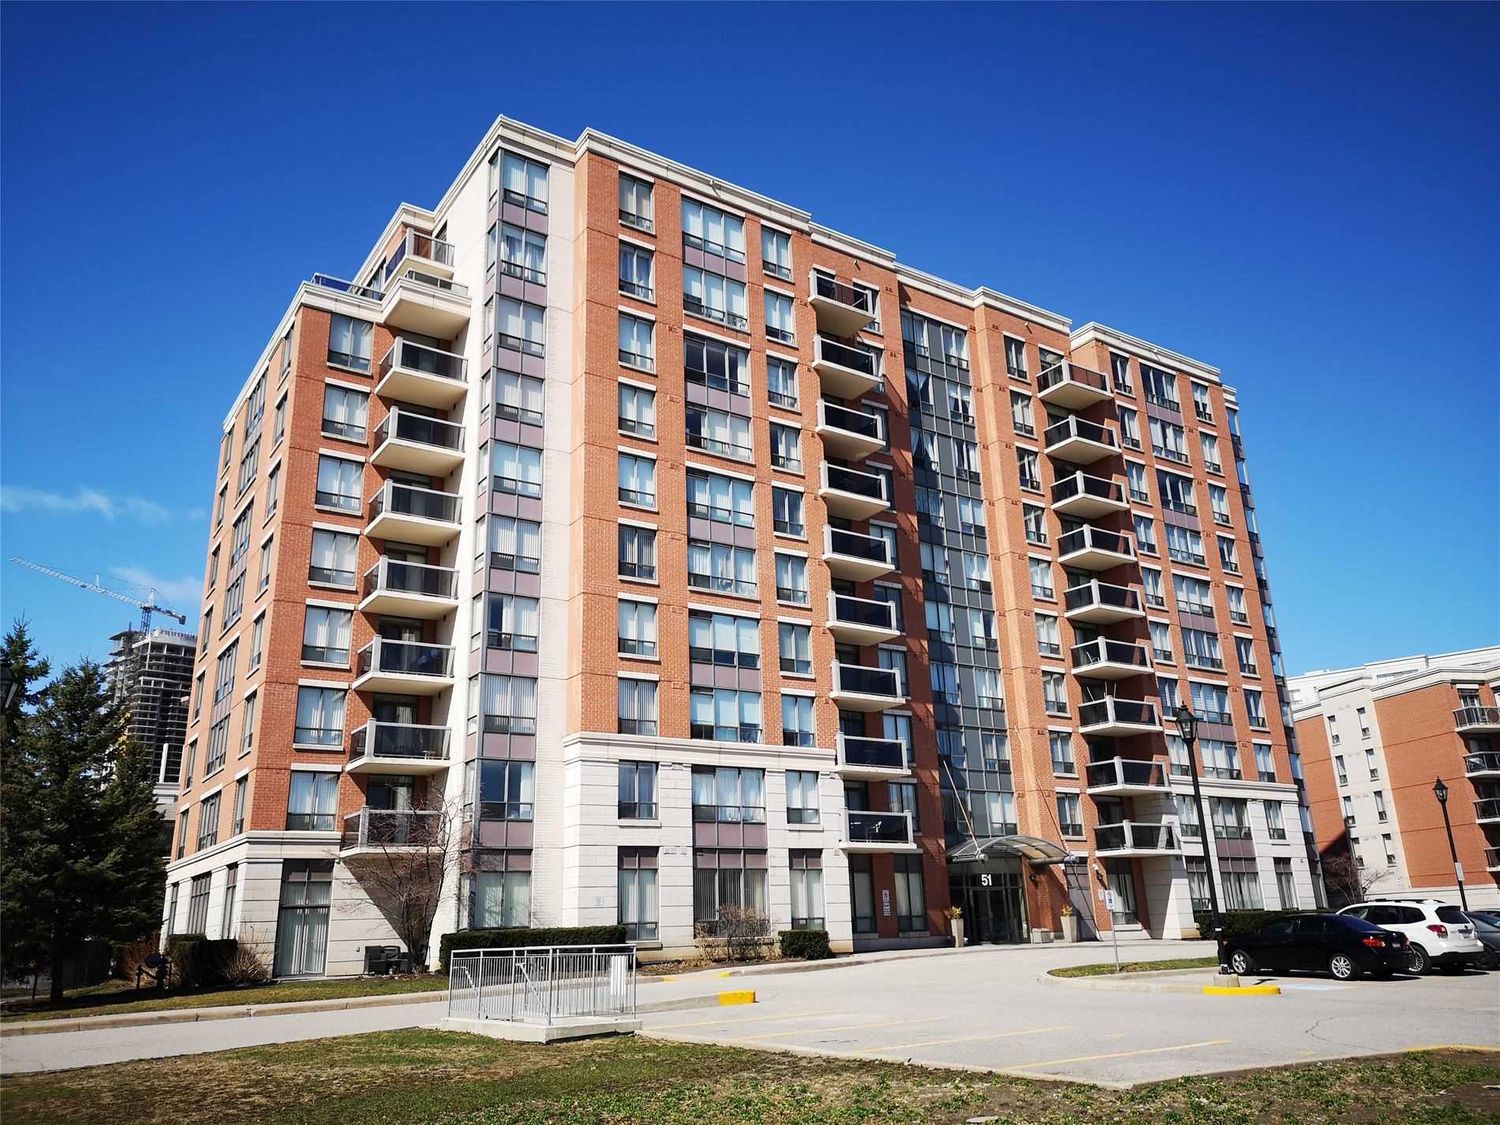 51 Times Avenue. Liberty Tower II Condos is located in  Markham, Toronto - image #1 of 2